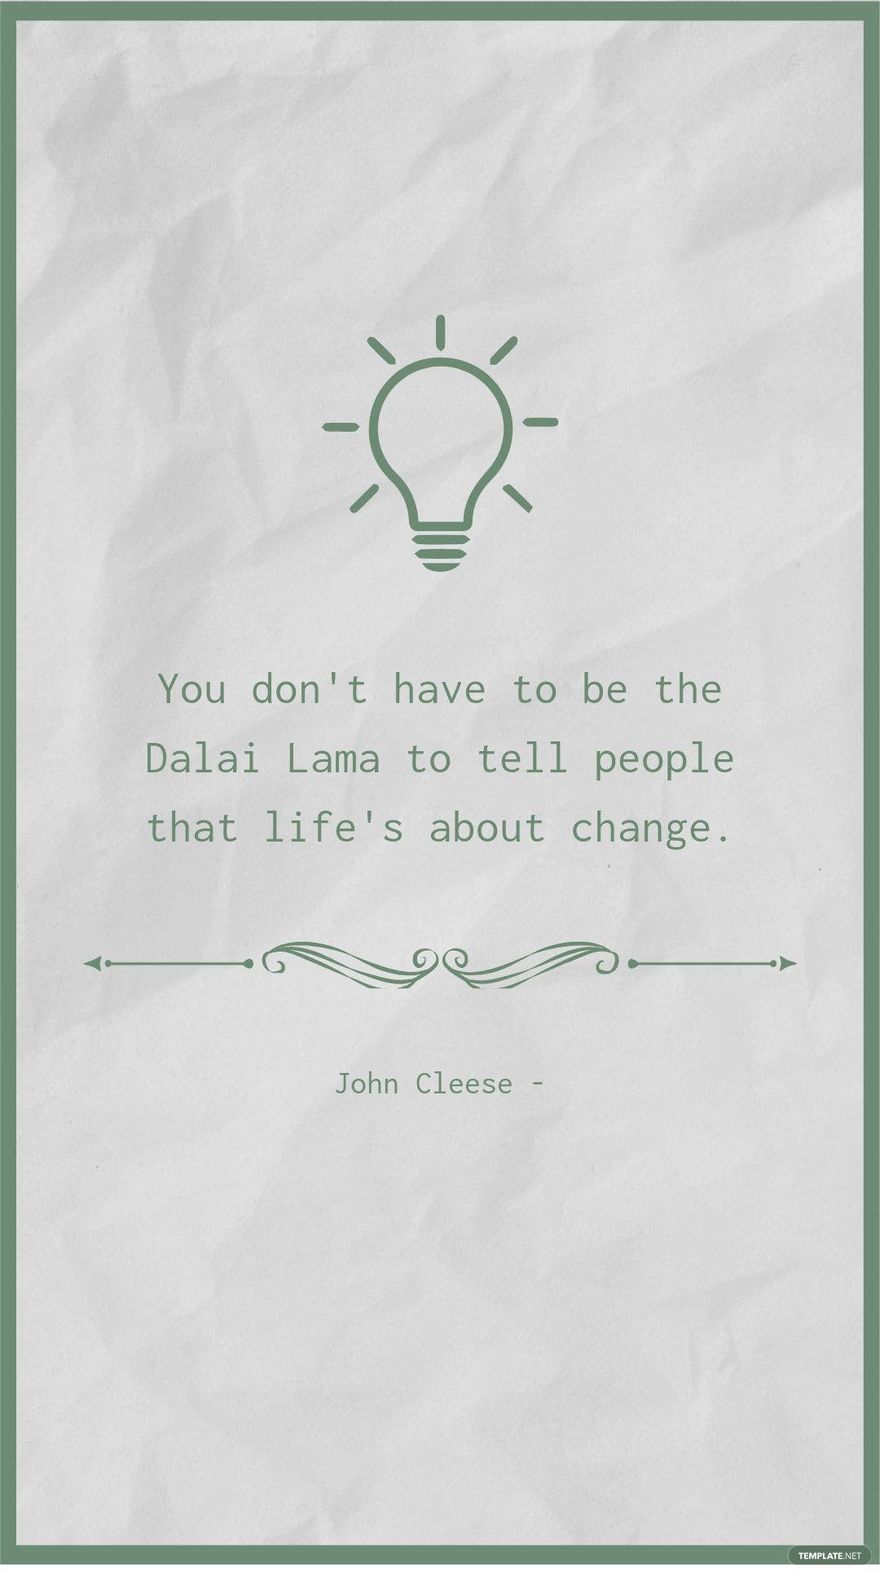 John Cleese - You don't have to be the Dalai Lama to tell people that life's about change.